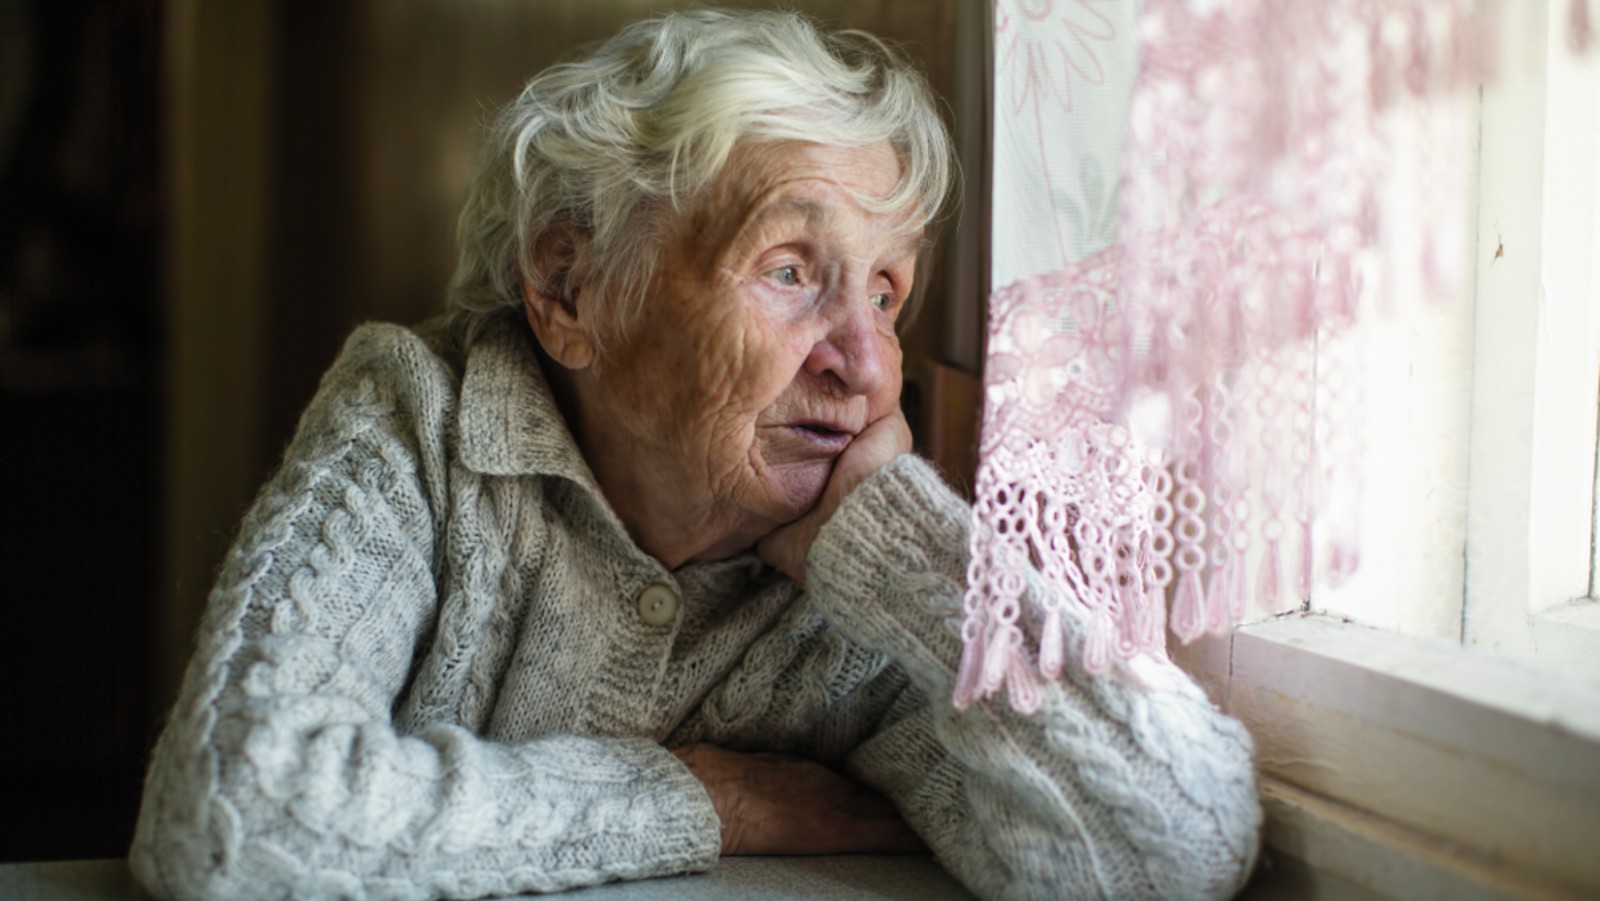 Study participants who felt subjectively younger than their chronological age exhibited no psychiatric symptoms related to loneliness. Photo by Grossinger/Shutterstock.com